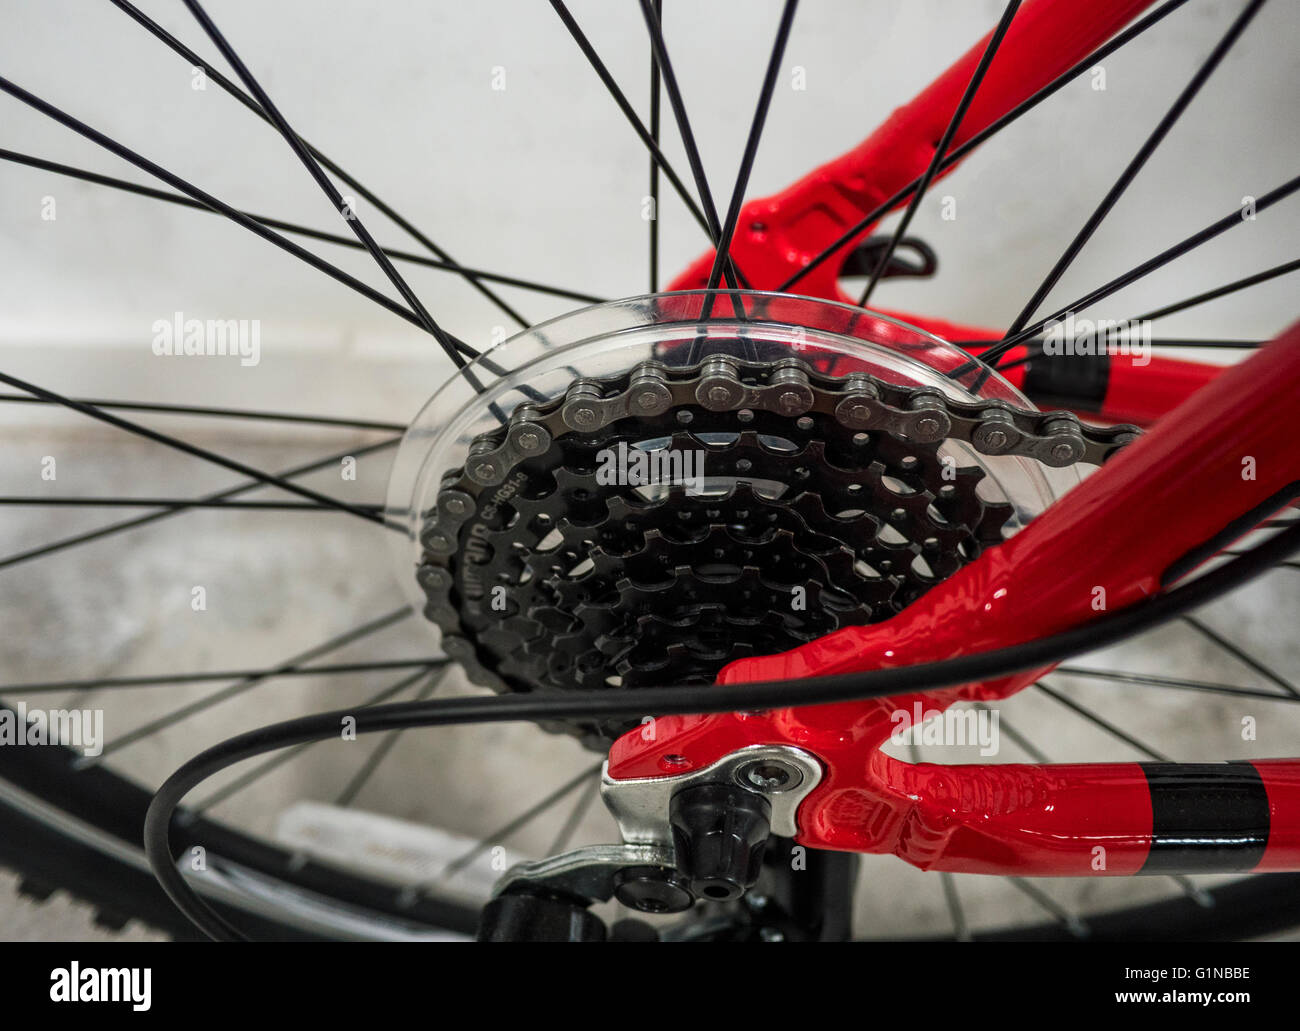 A close up of bike gears and chain on a red mountain bike or bicycle. Stock Photo